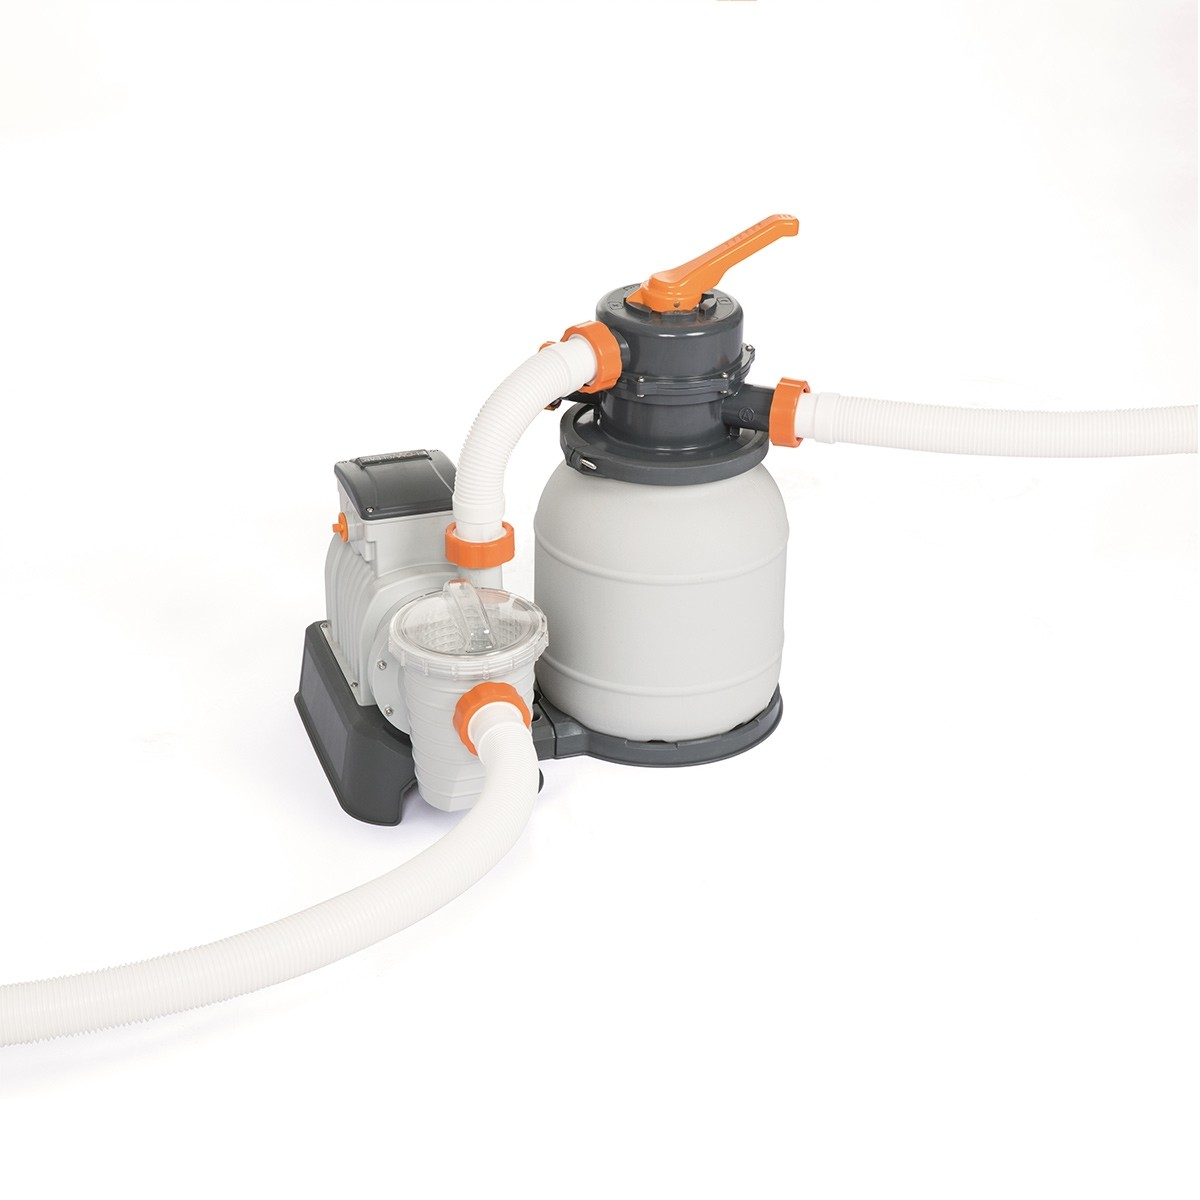 Bestway Sand Filter Pump - Two Options Available